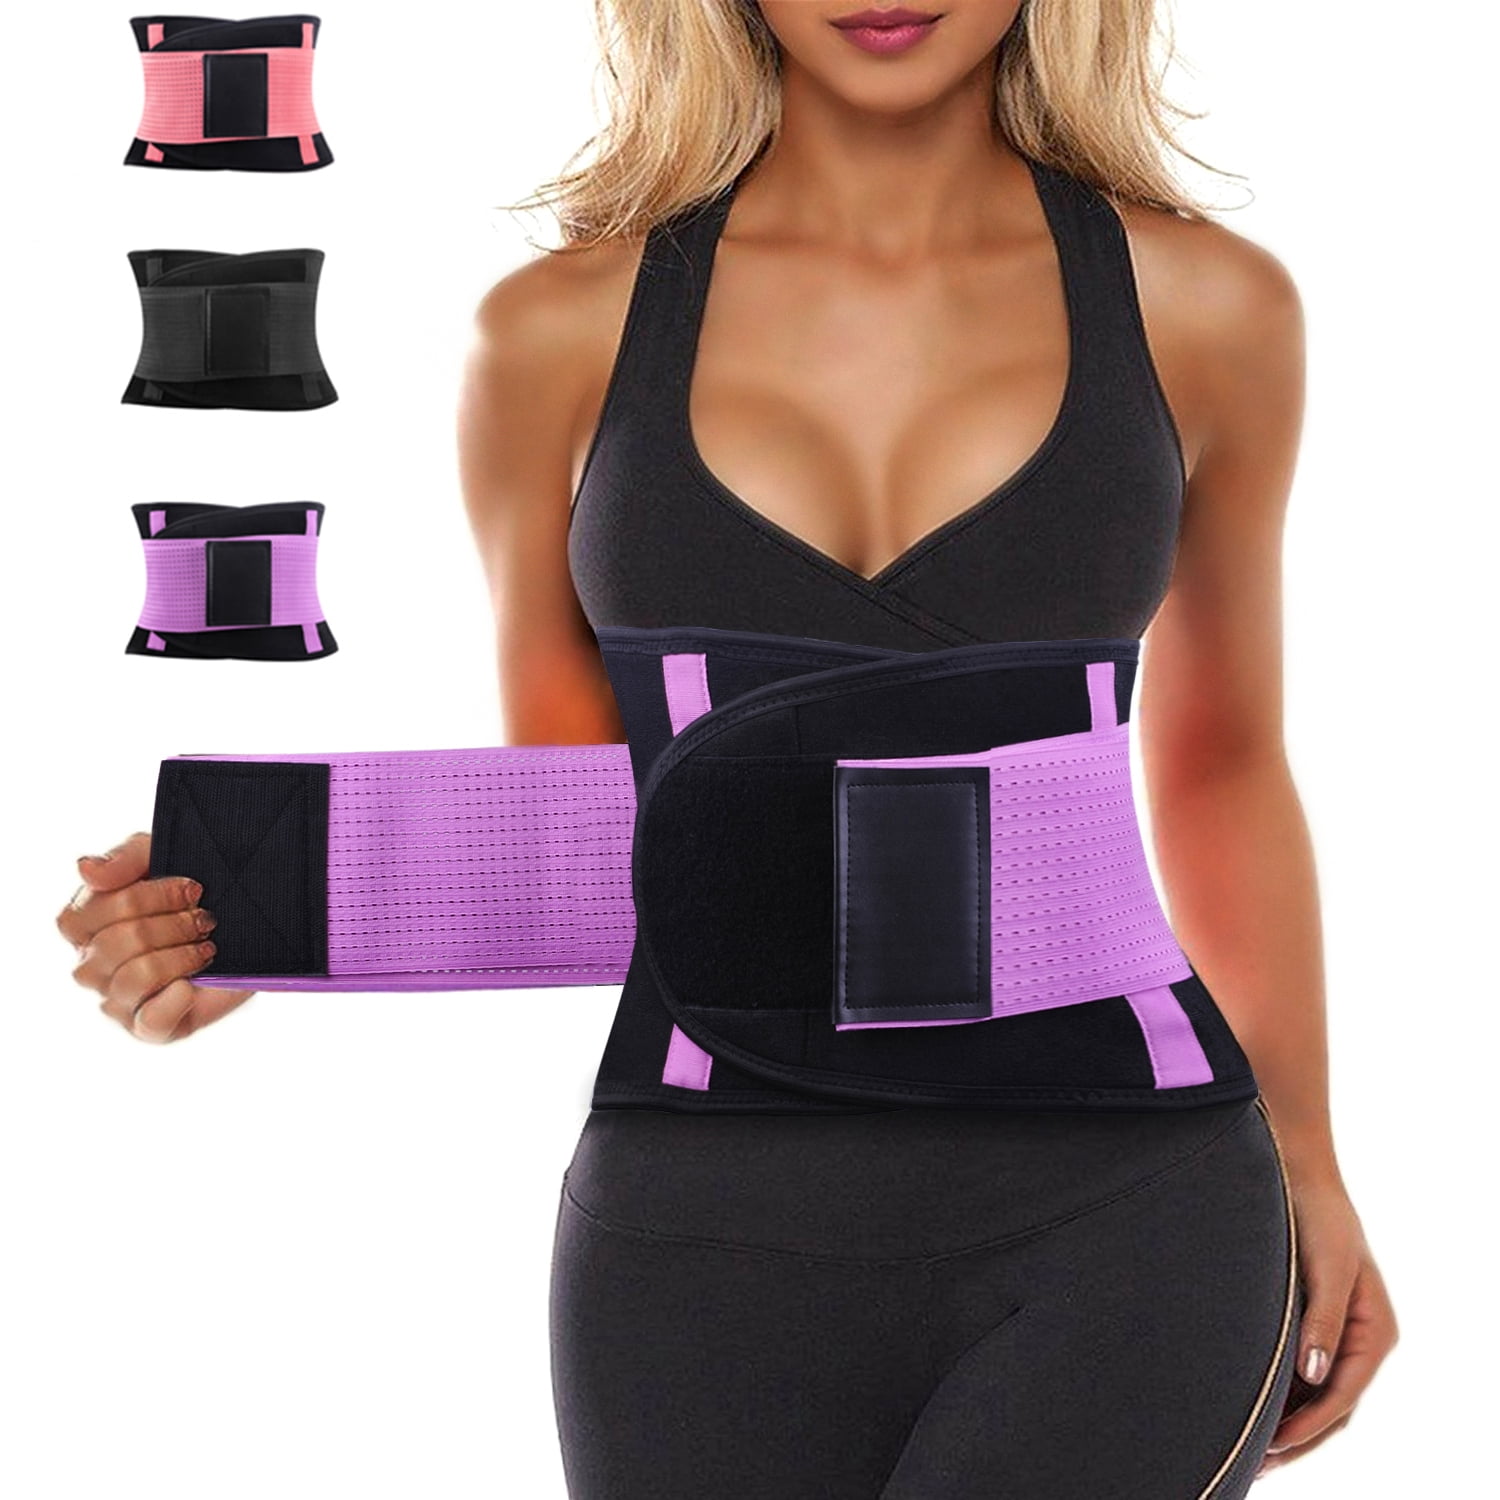 Womens Back Brace for Lower Pain Relief & Herniated Disc Sciatica,Back  Support Belt for Lifting at Work Scoliosis,Purple,S